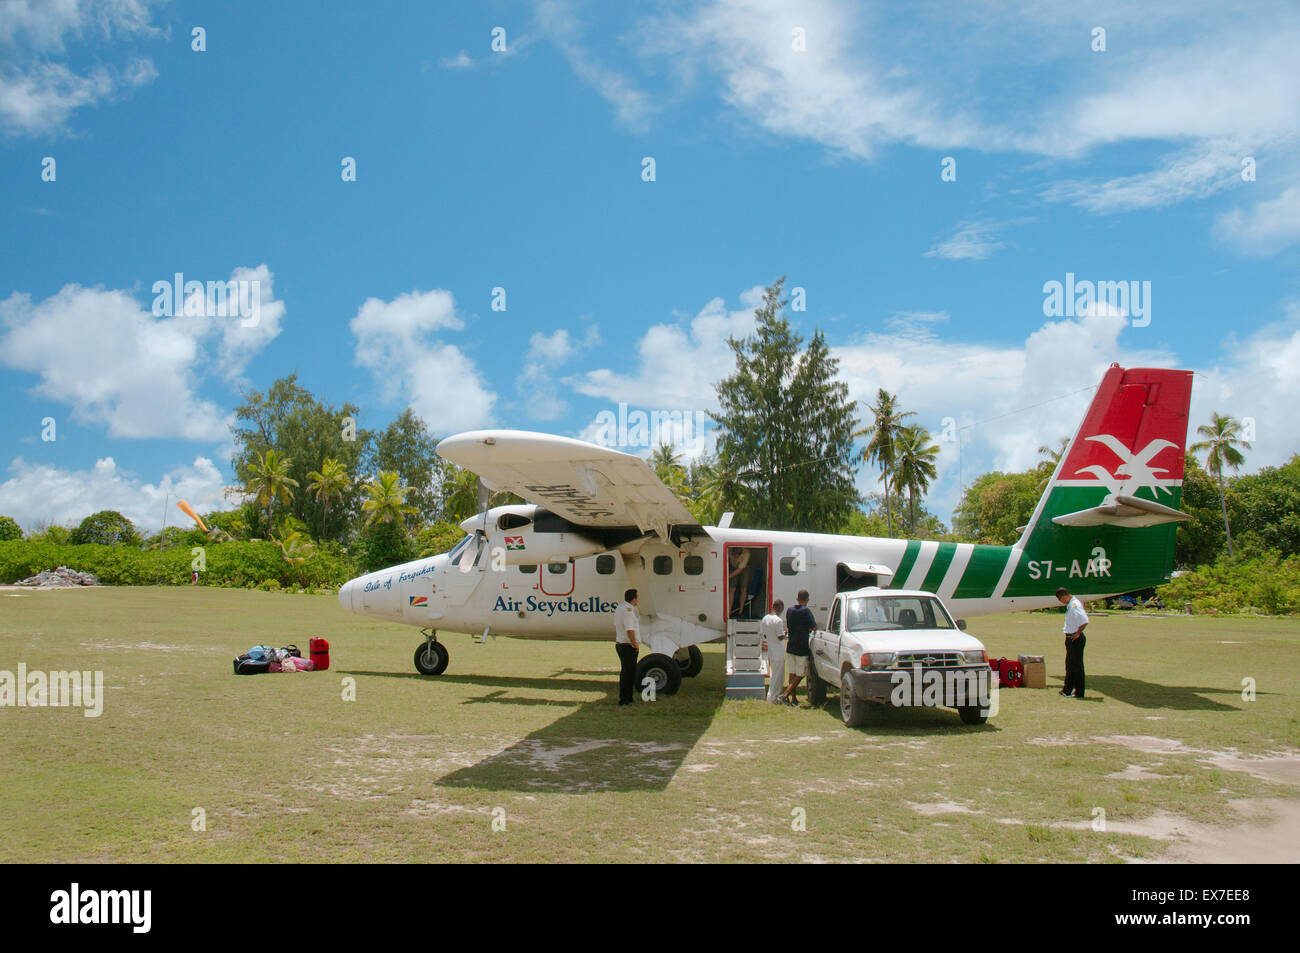 A small plane Seychelles airlines stands on the runway, Denis island, Seychelles Stock Photo